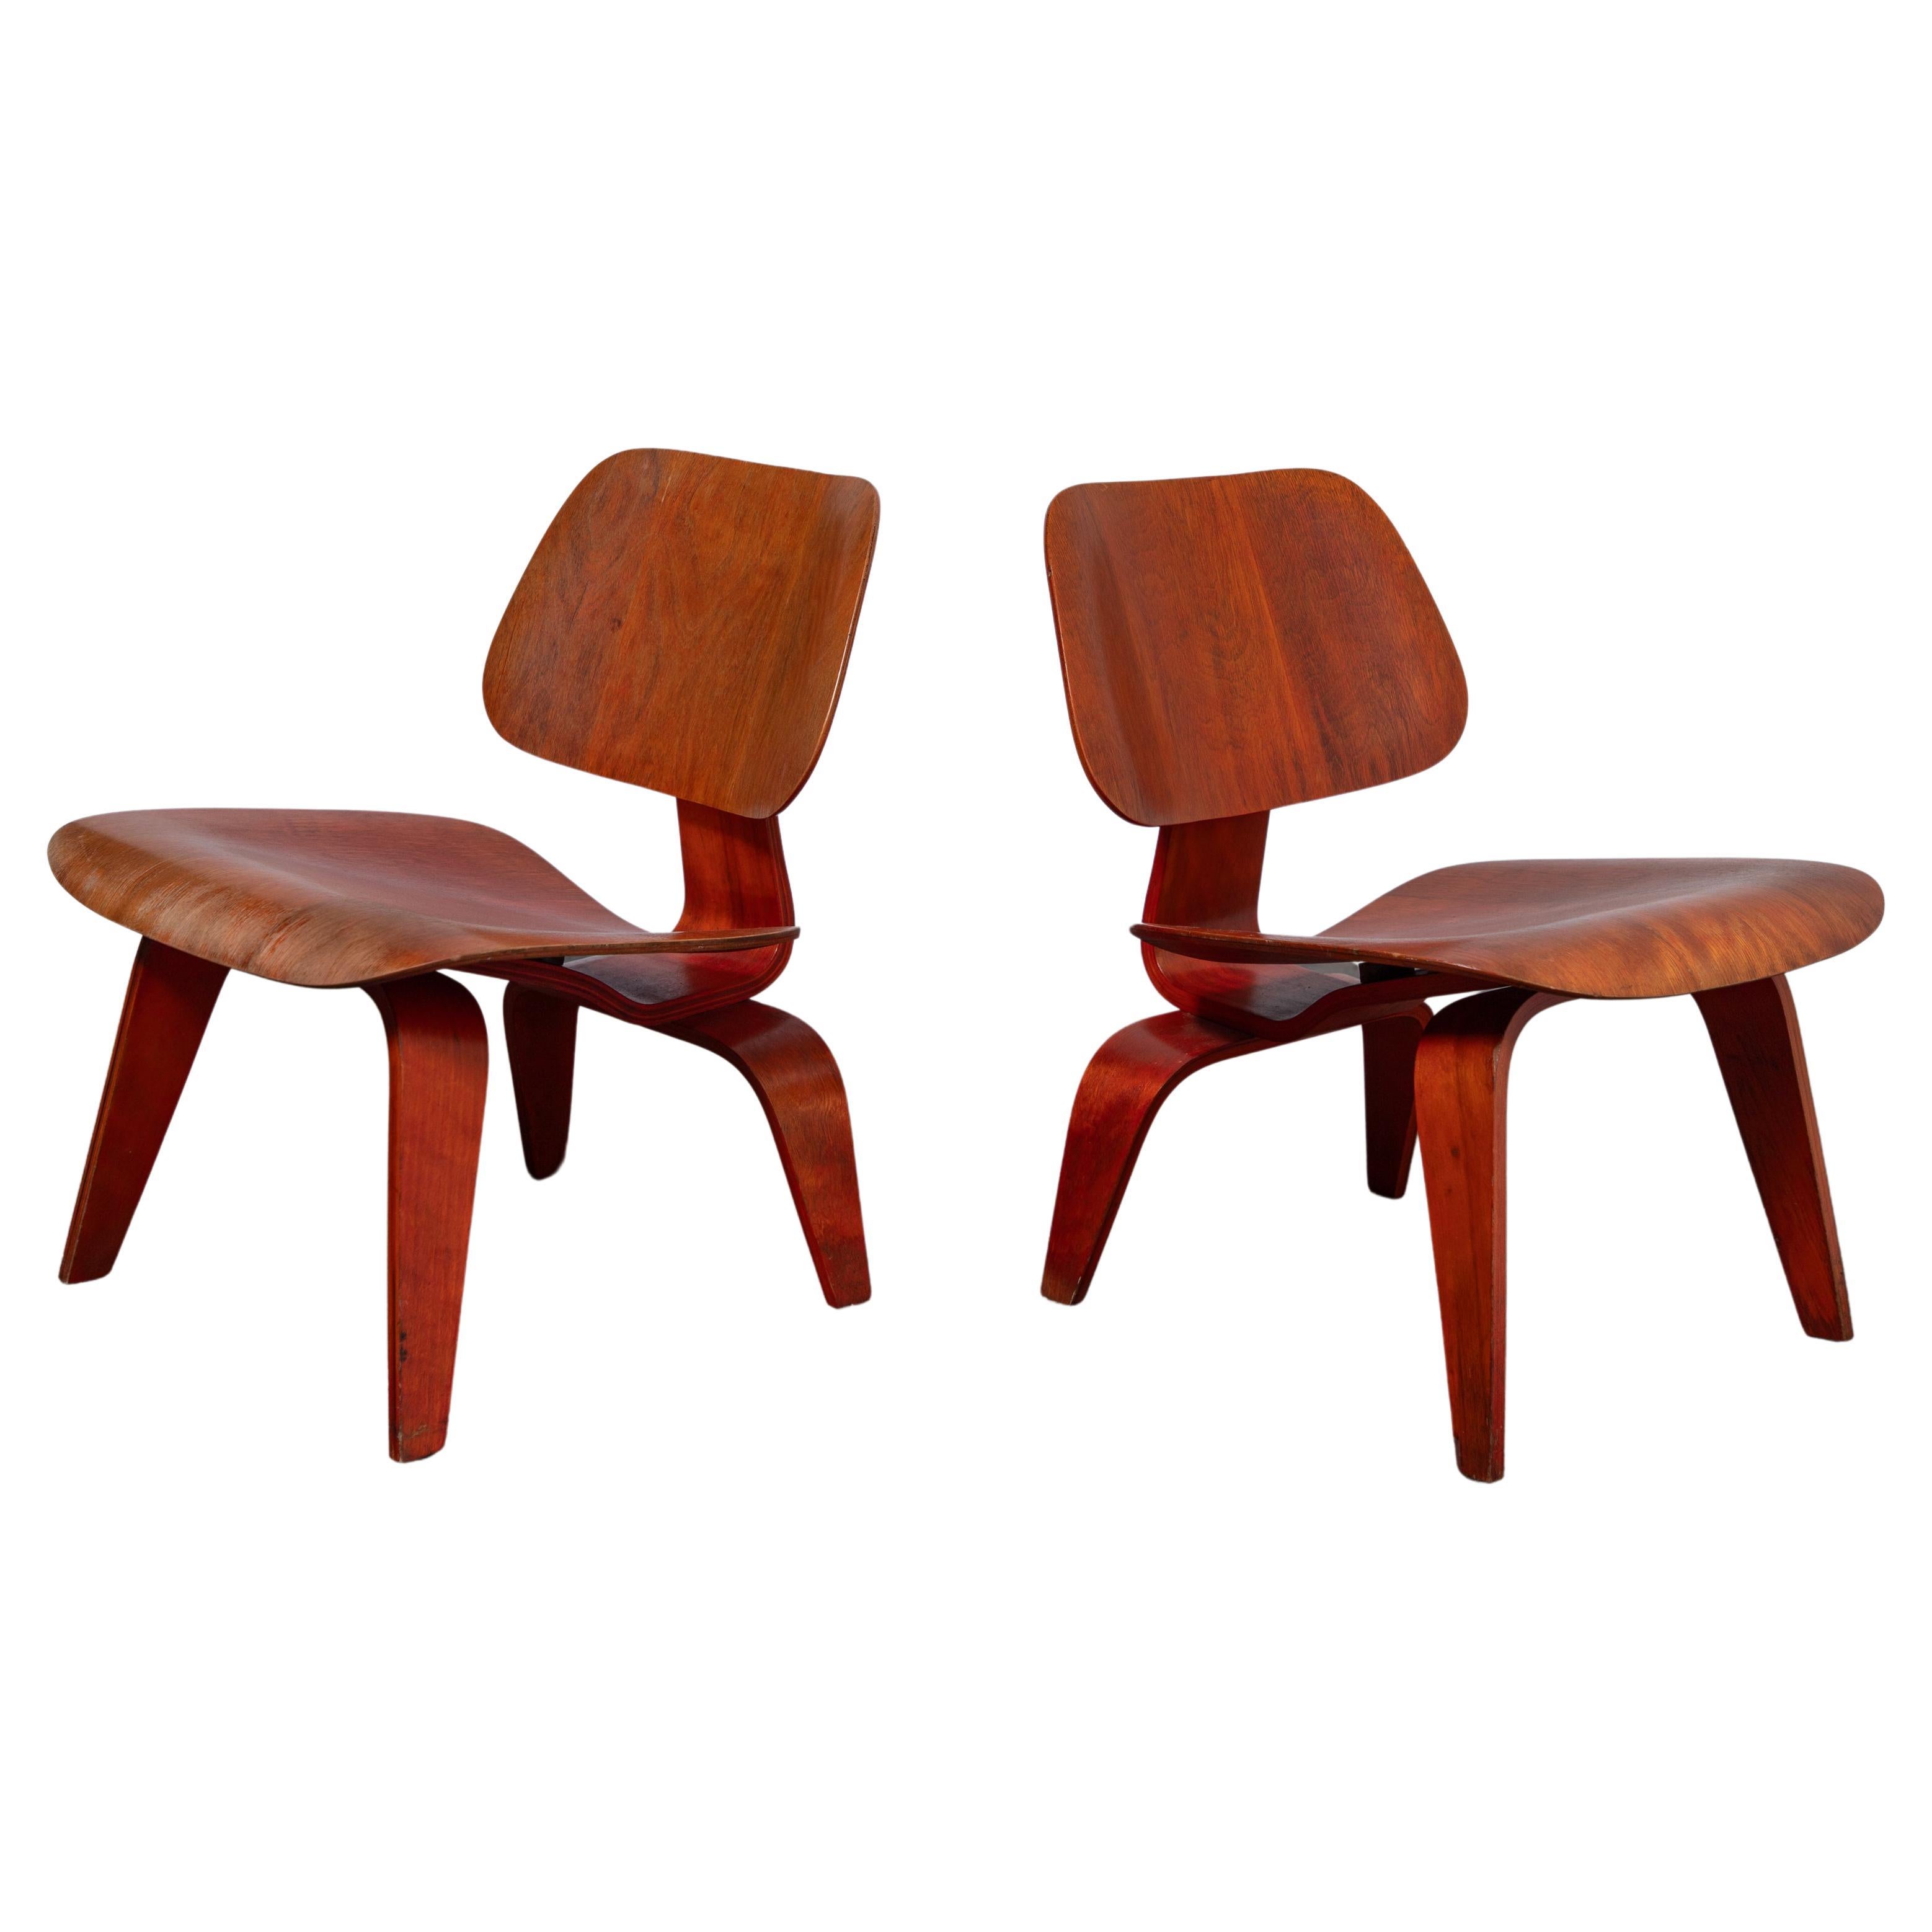 Eames Evans Red Aniline Dye LCW Lounge Chairs - Matched Pair   For Sale